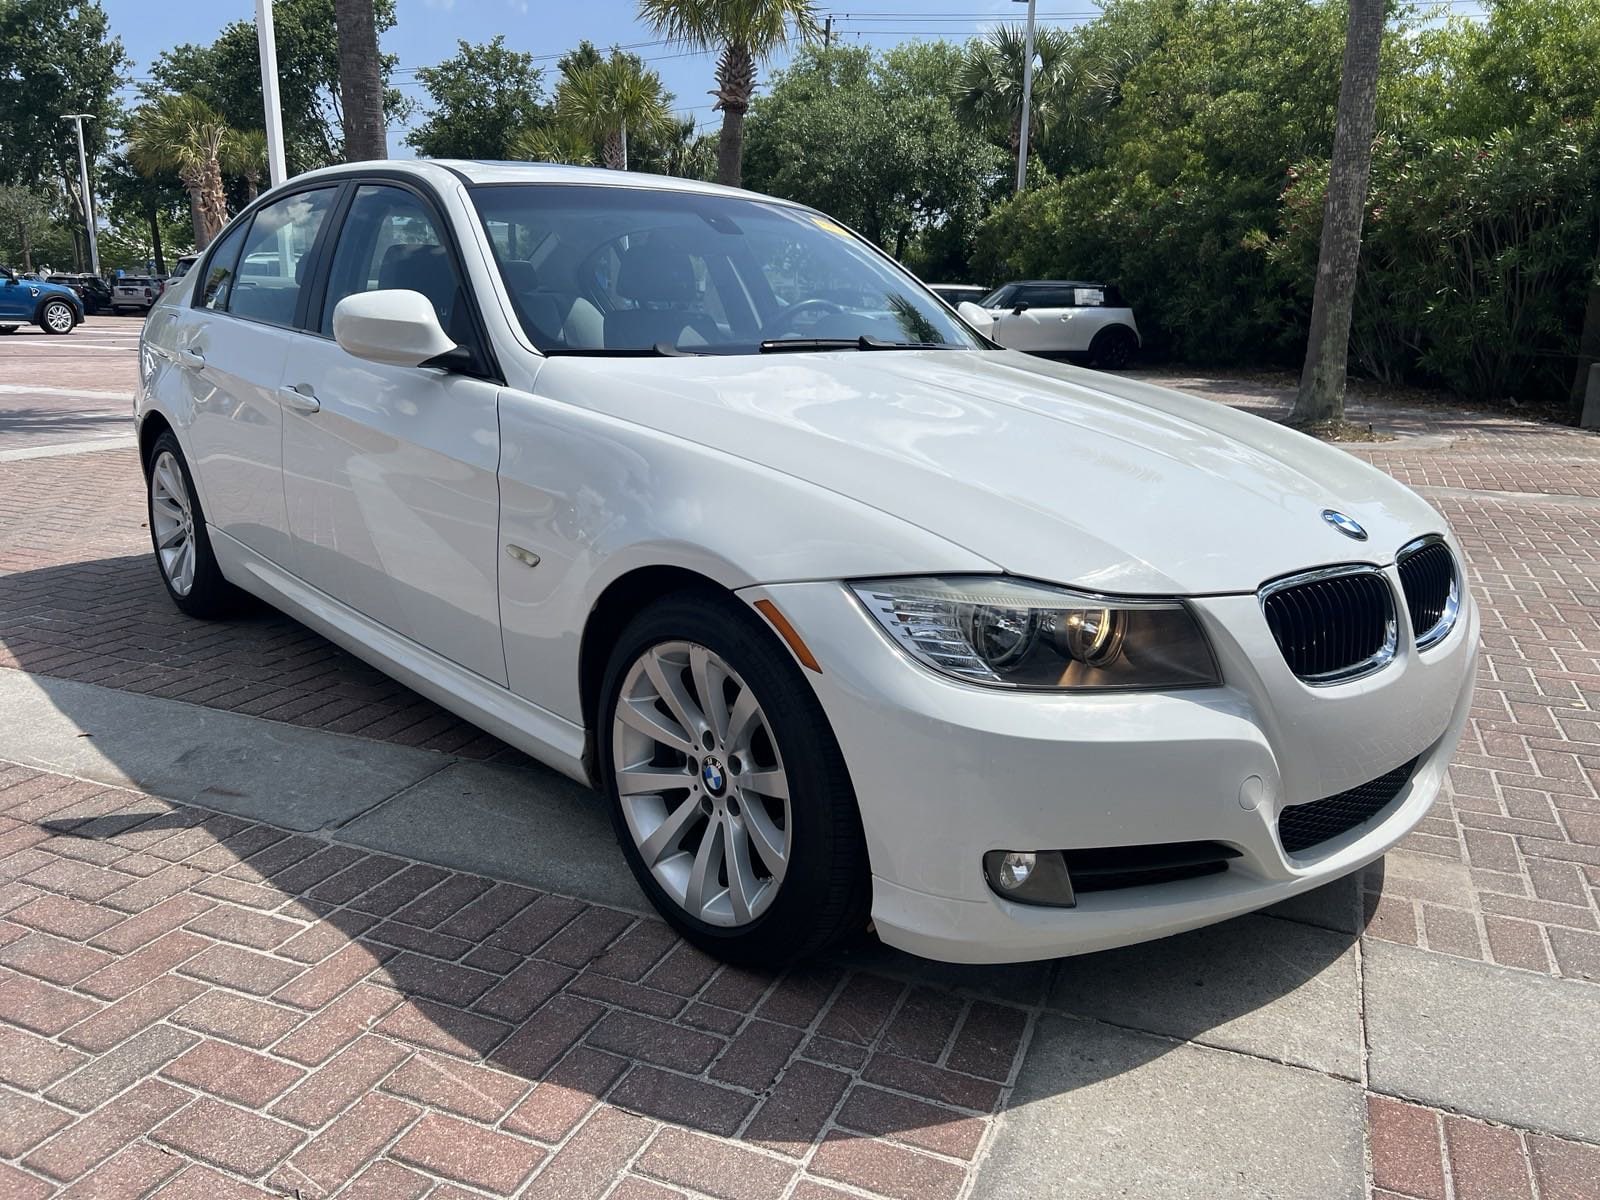 Used 2009 BMW 3 Series 328i with VIN WBAPH77509NM29816 for sale in Charleston, SC